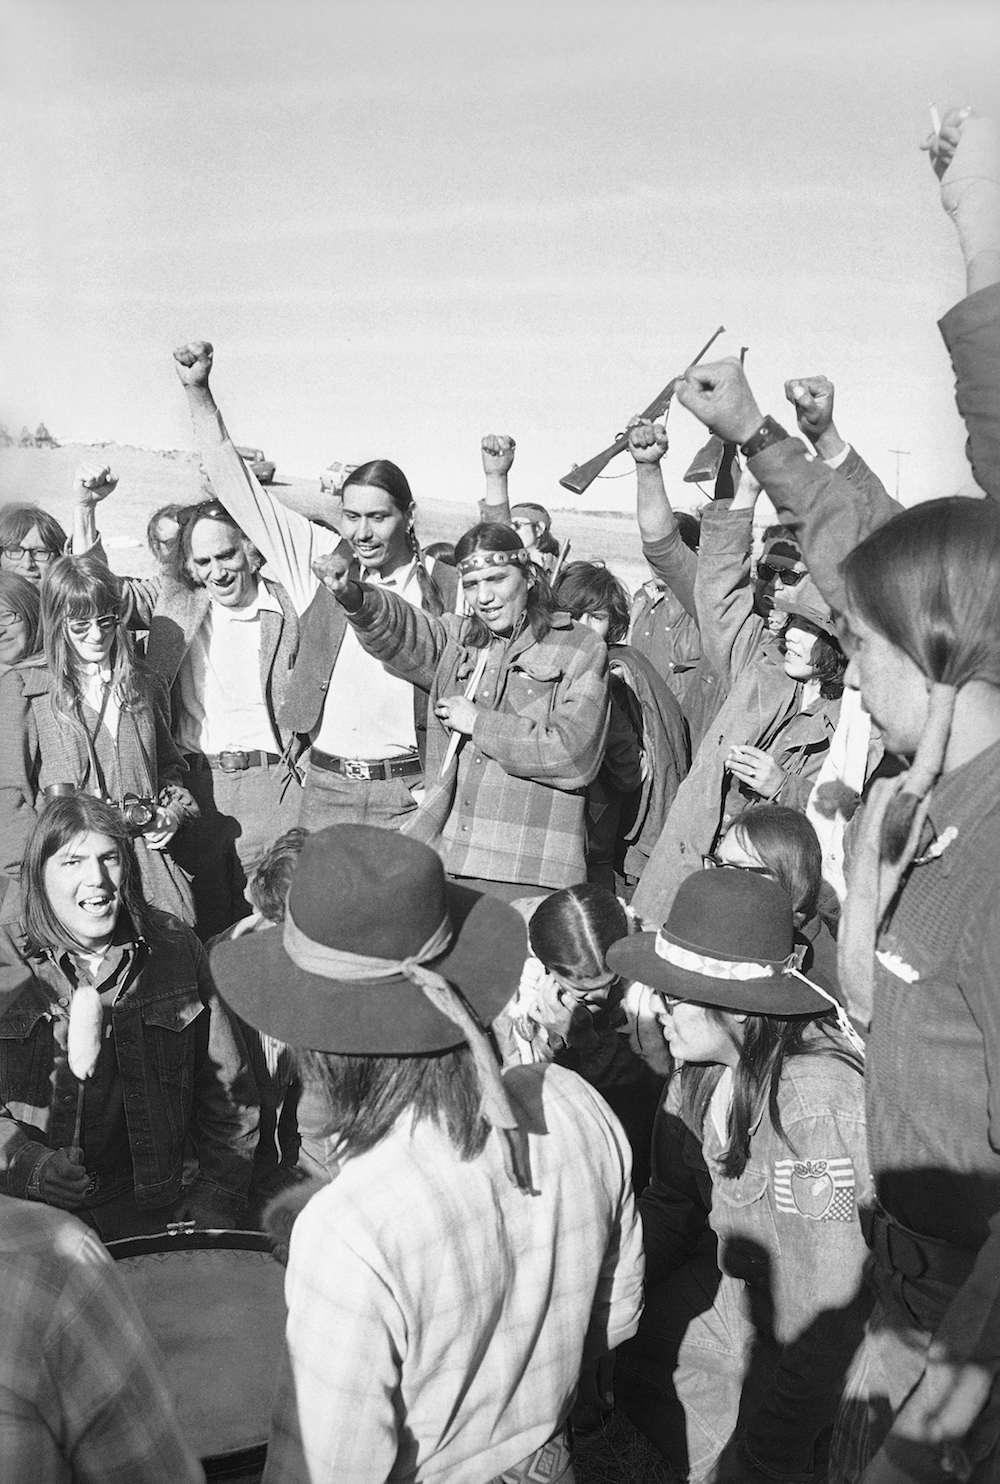 American Indian Movement (AIM) members and supporters celebrate the pullout of federal lawmen from roadblocks in Wounded Knee, South Dakota, on March 10, 1973. Federal forces surrounded Wounded Knee for over a week following AIM's takeover of the town